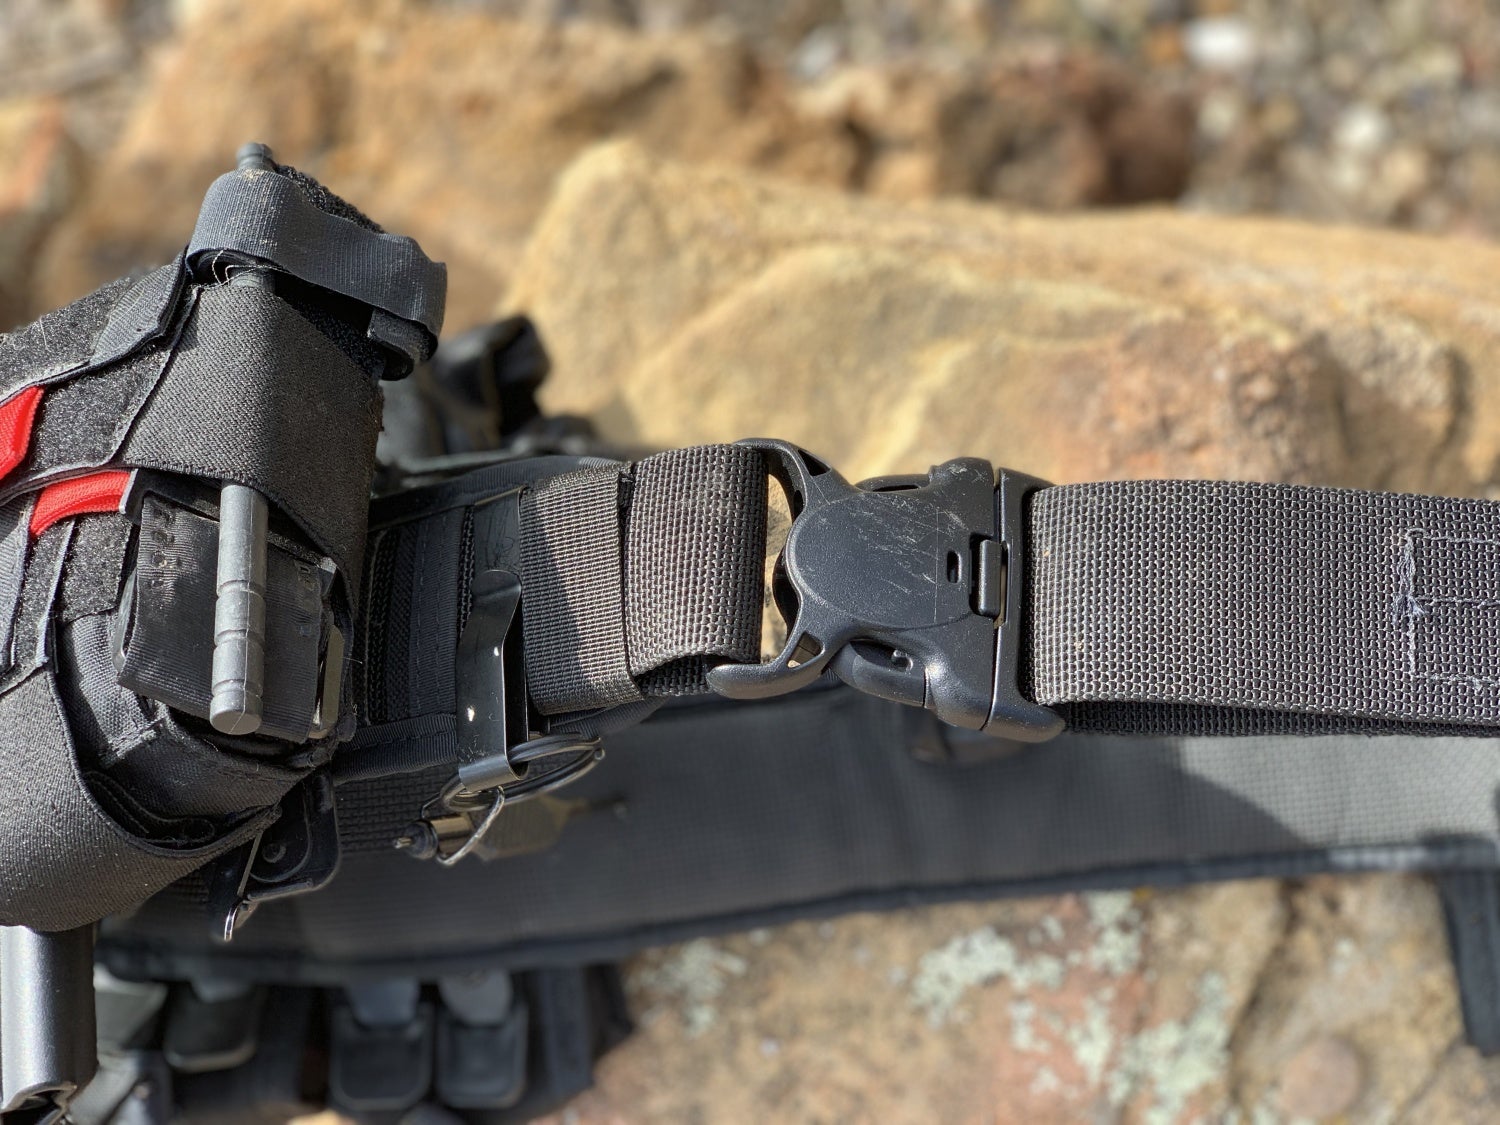 Cop-Lock Duty Belt with the “third” locking mechanism—the button in the middle of the body.